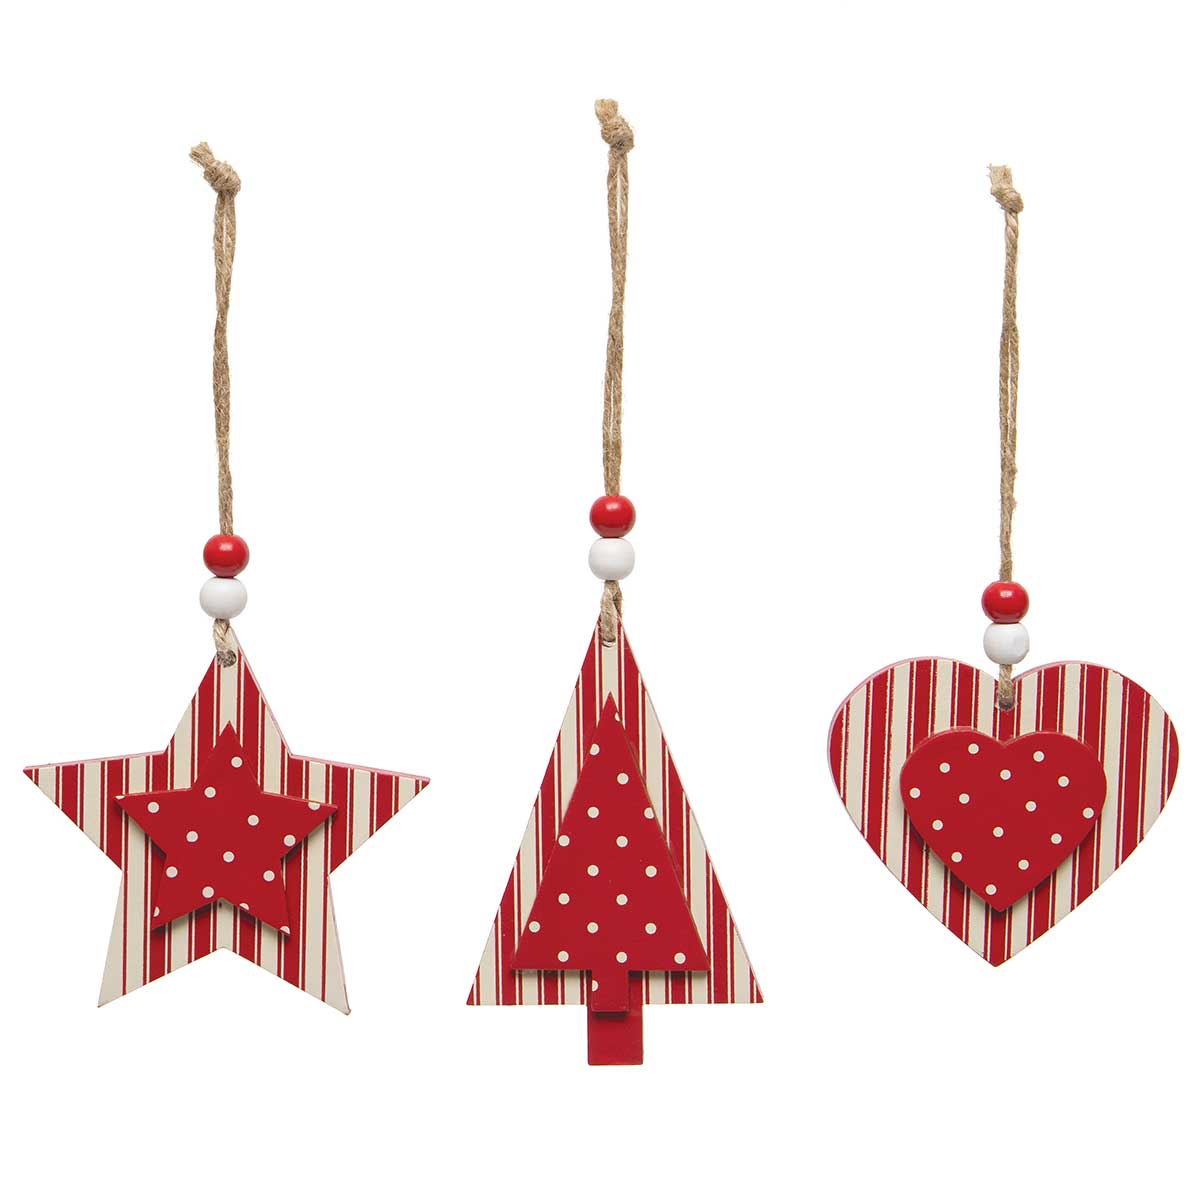 !TICKING WOOD ORNAMENT RED/CREAM WITH PINDOTS, BEADS